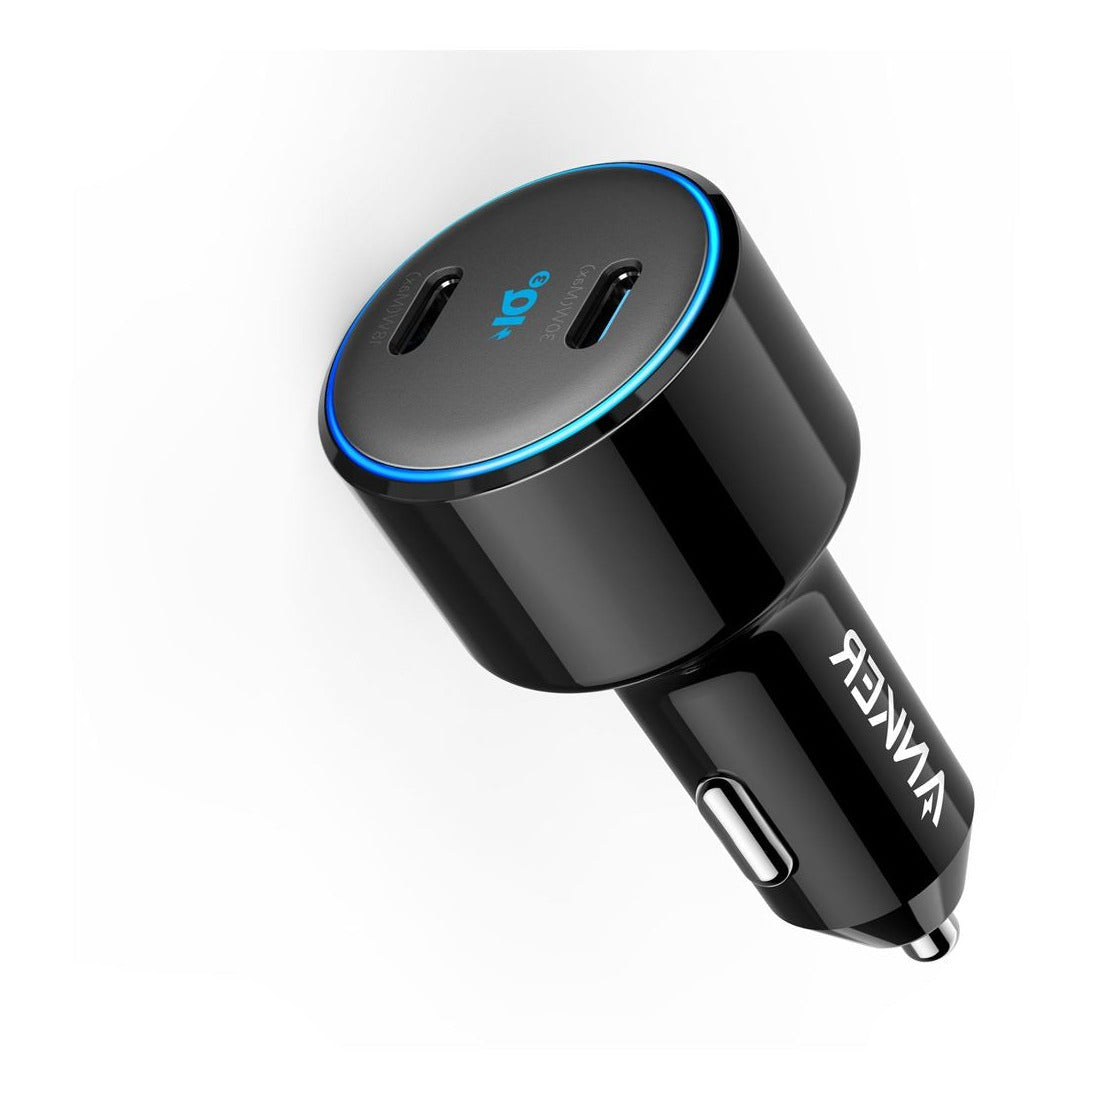 Anker Power Drive in black color